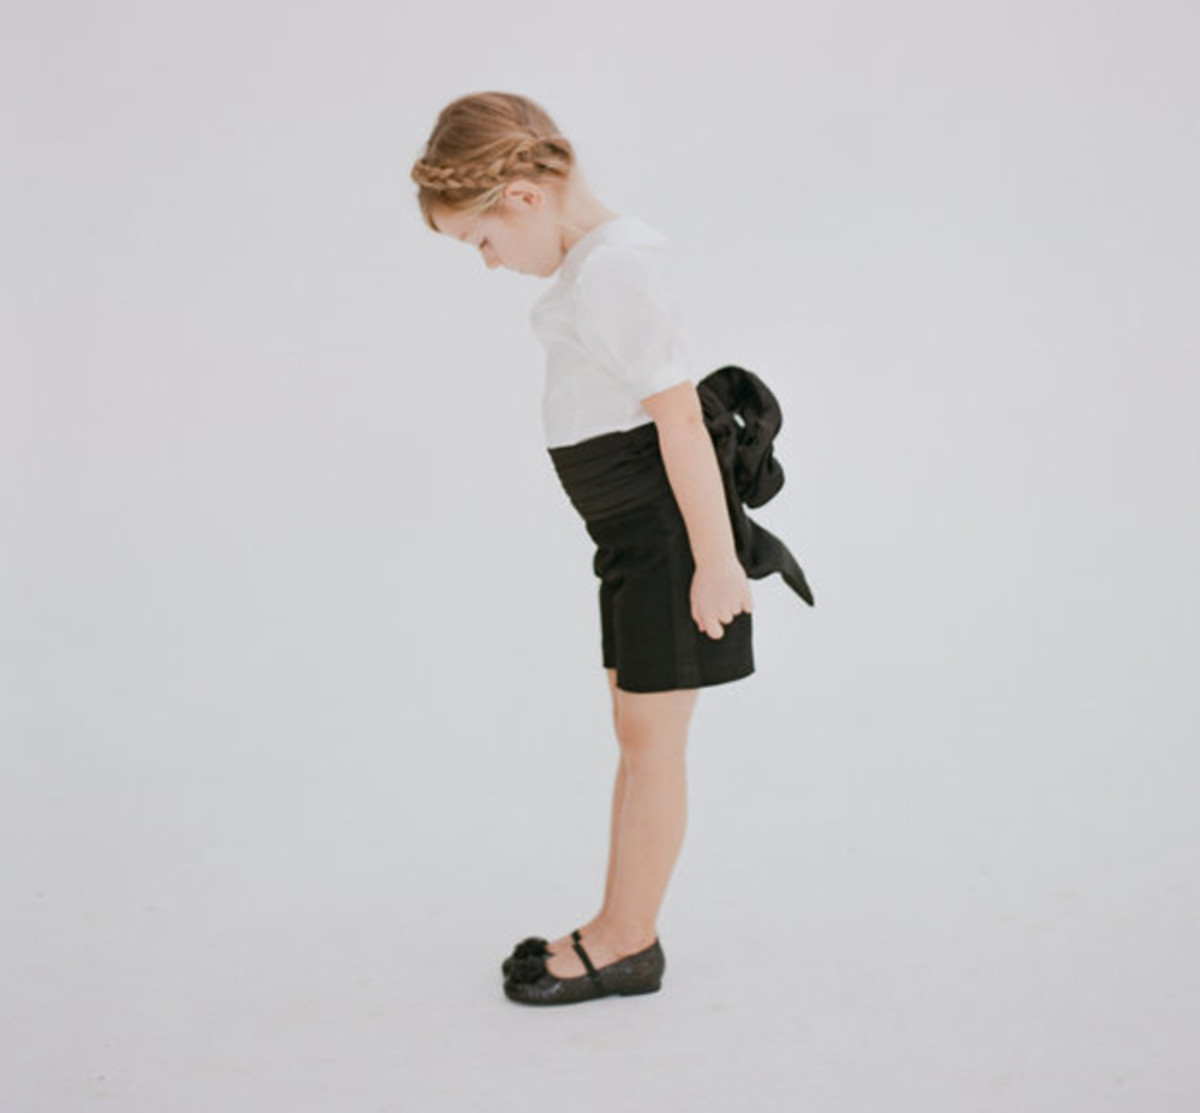 Coco Flower Girl Tux Shorts and Blouse, $250, available at DolorisPetunia